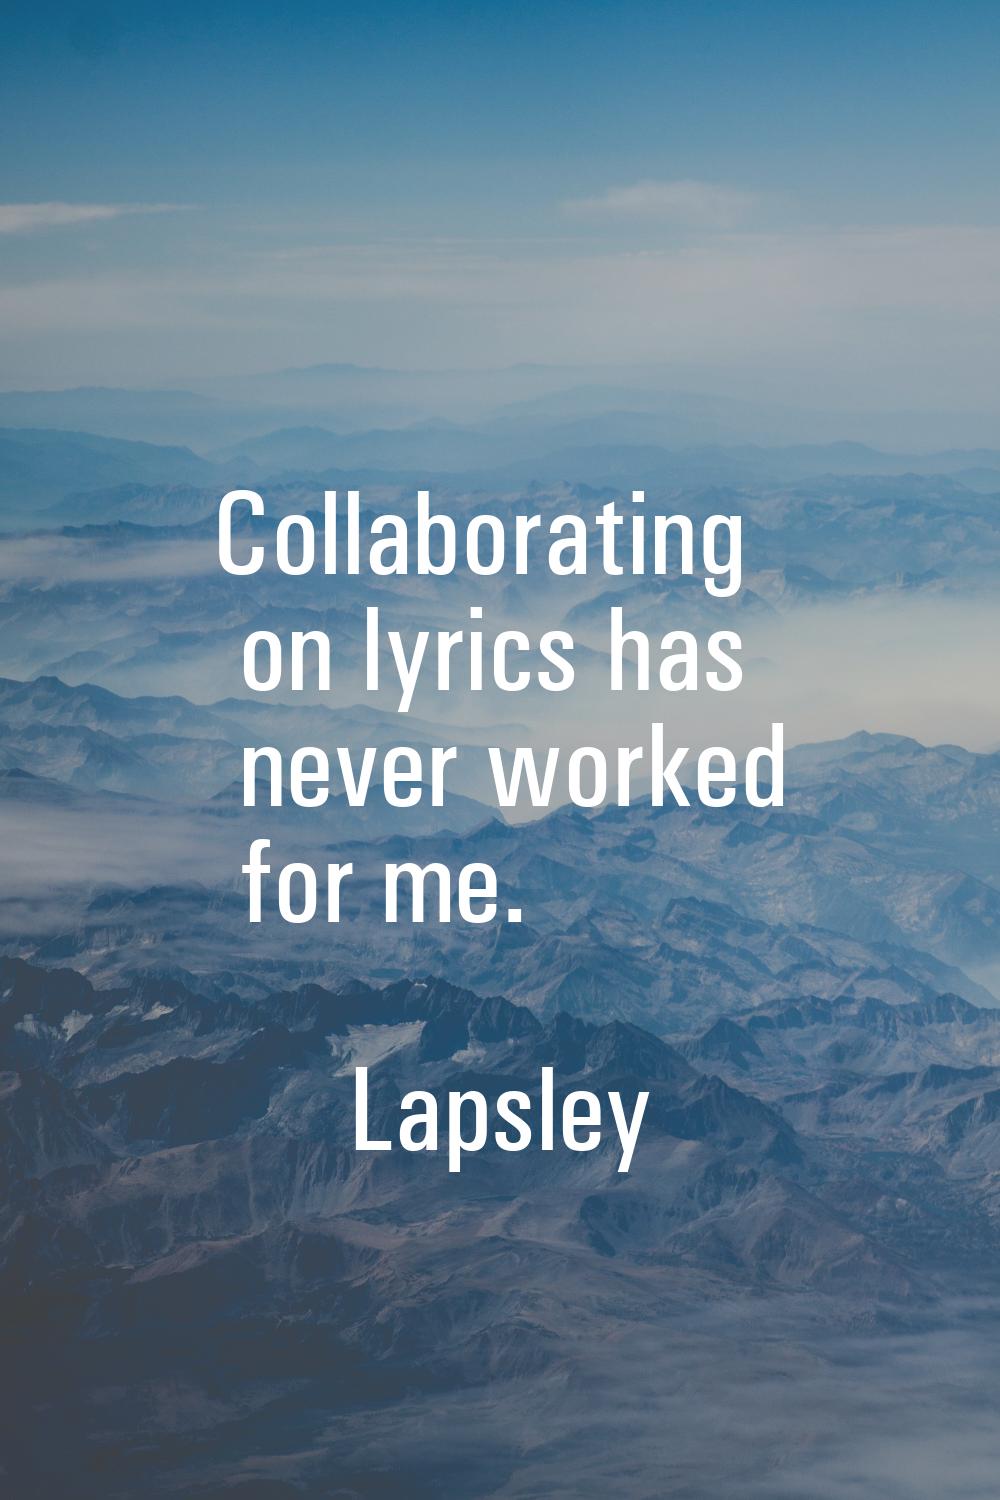 Collaborating on lyrics has never worked for me.